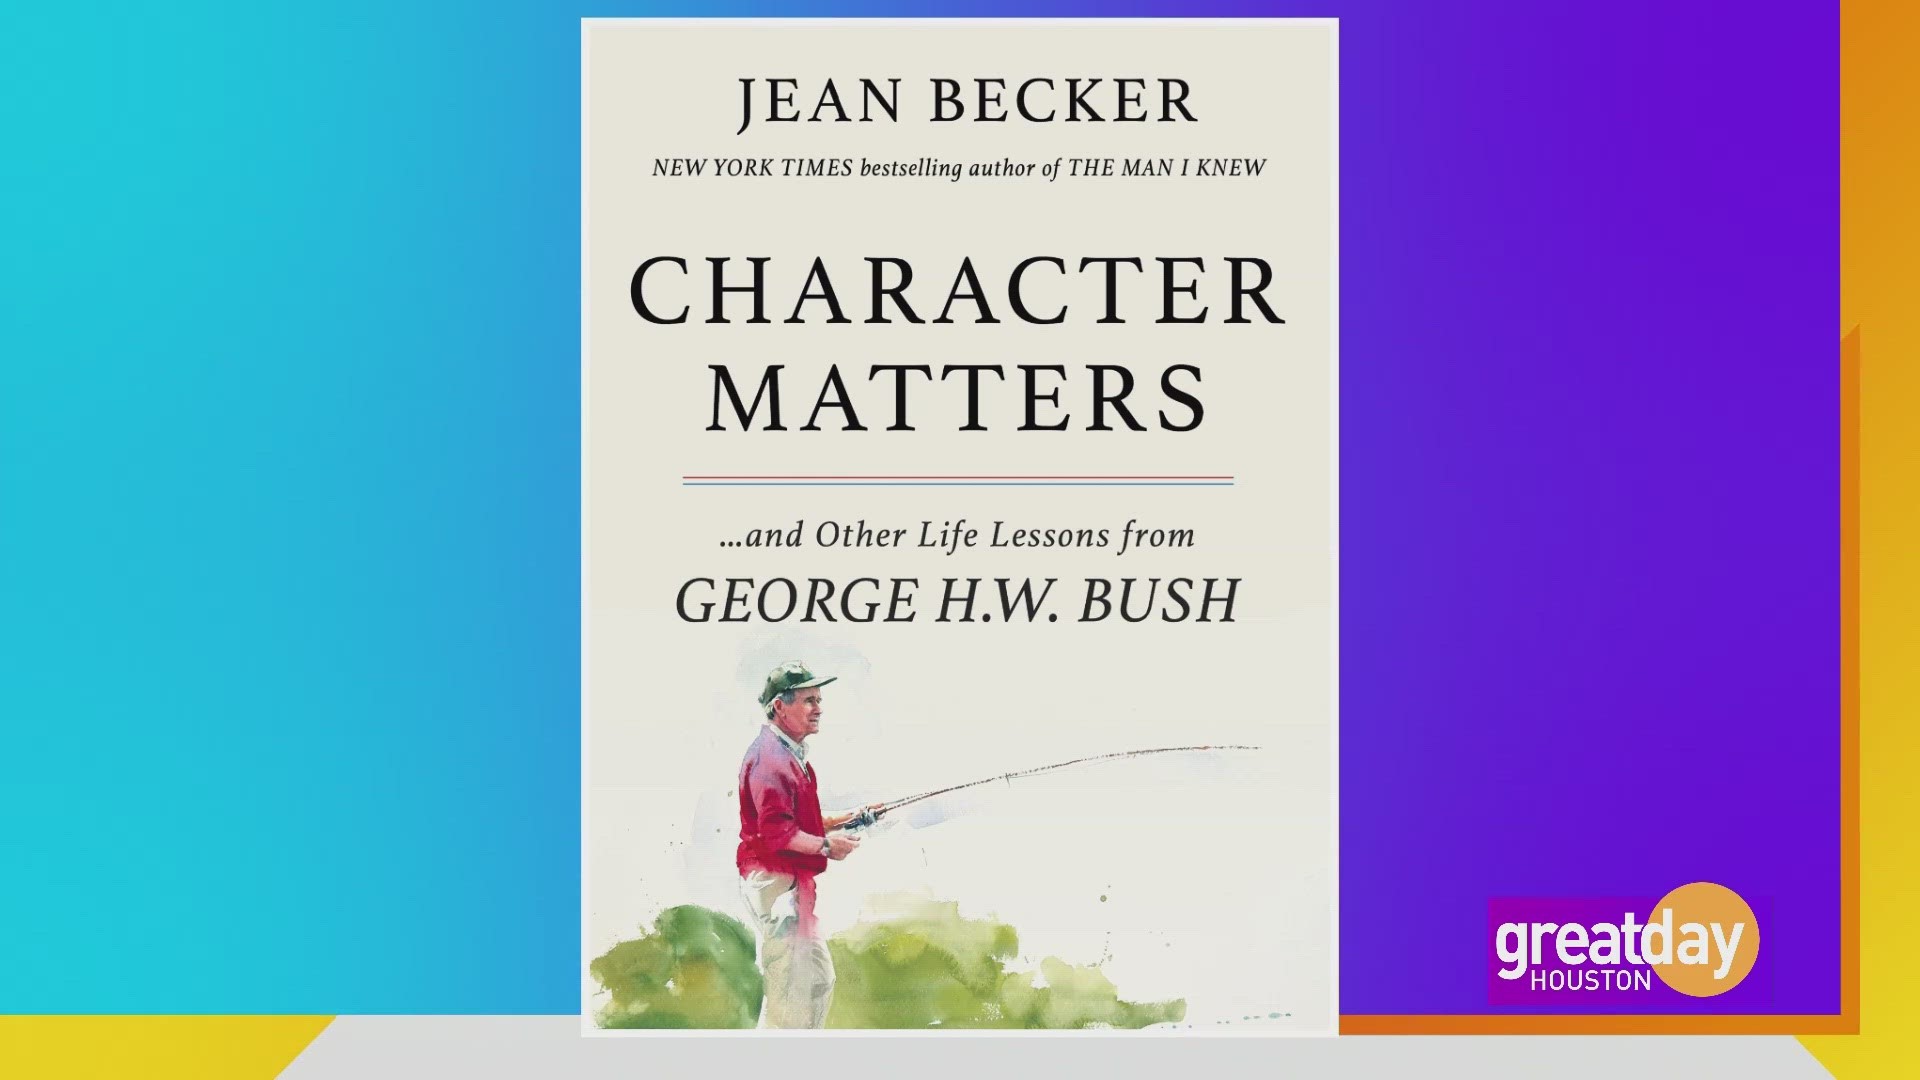 President George H.W. Bush's former Chief of Staff Jean Becker dicusses how the President's legacy can help heal our nation.